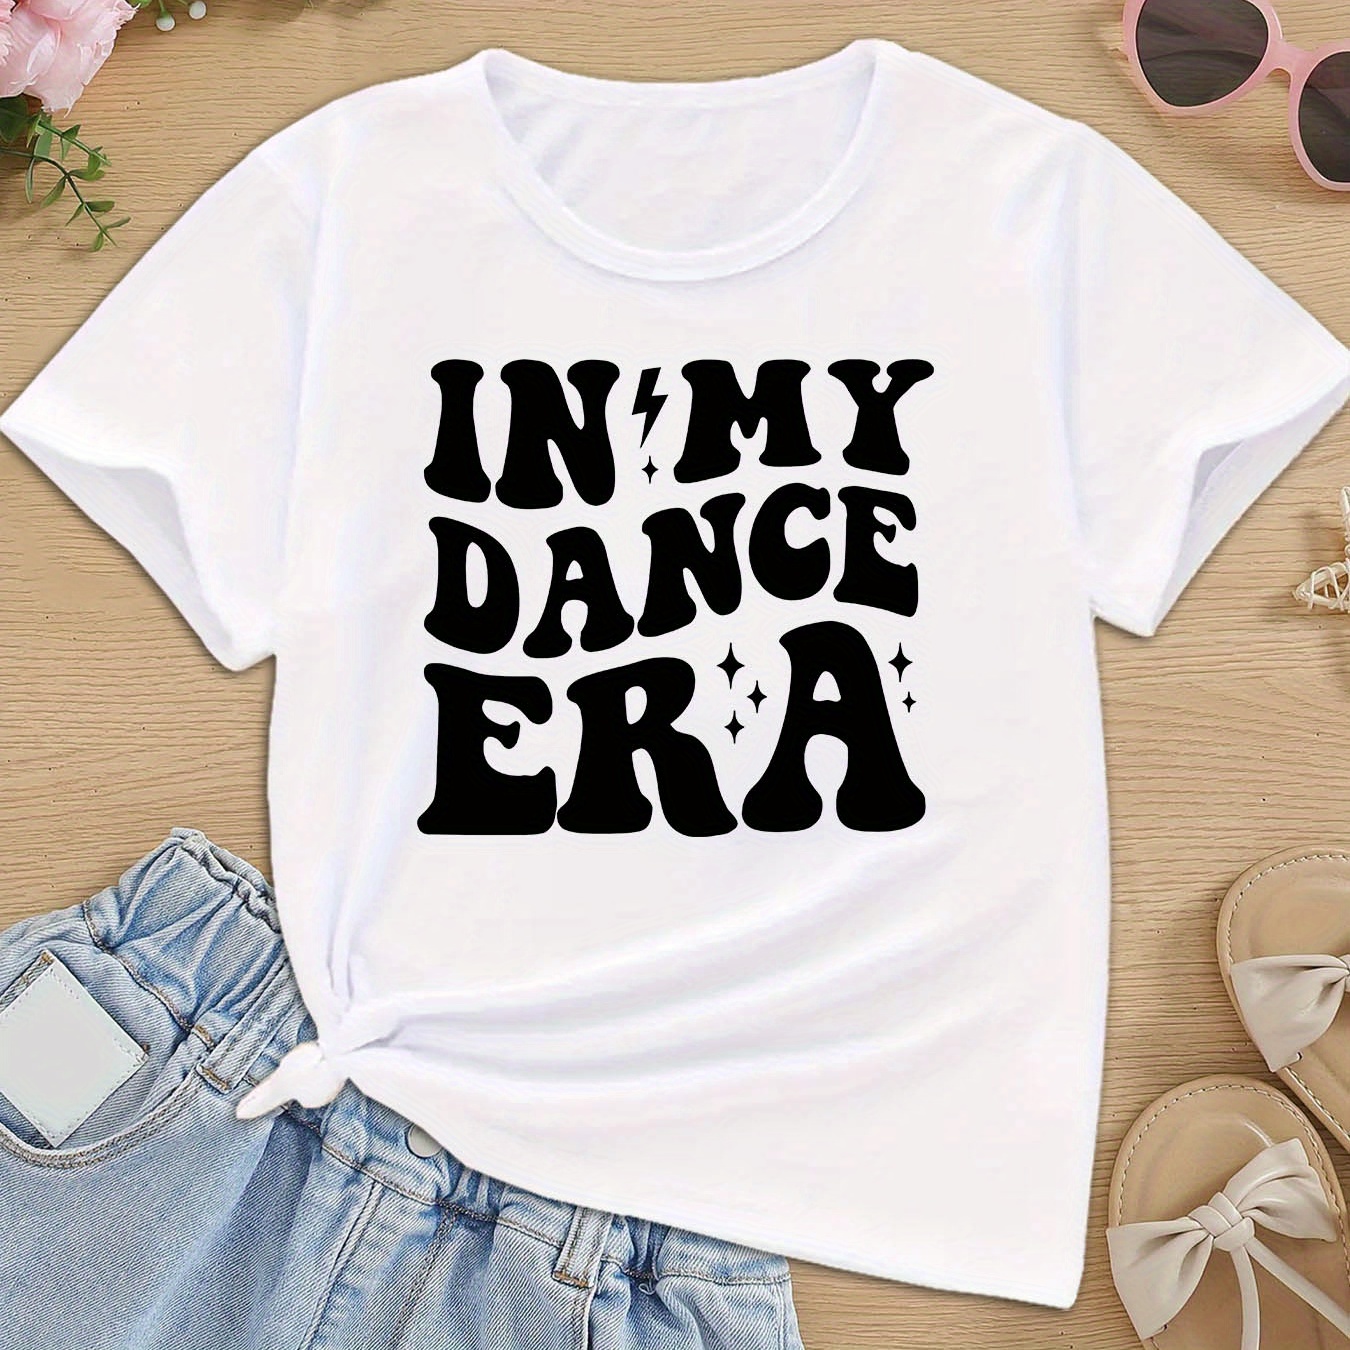 

Girls' Casual Comfort In My Dance Era Letter Print T-shirt, Summer Soft Stretchy Breathable Round Neck Tee, Fashion Clothing - Multiple Sizes Available